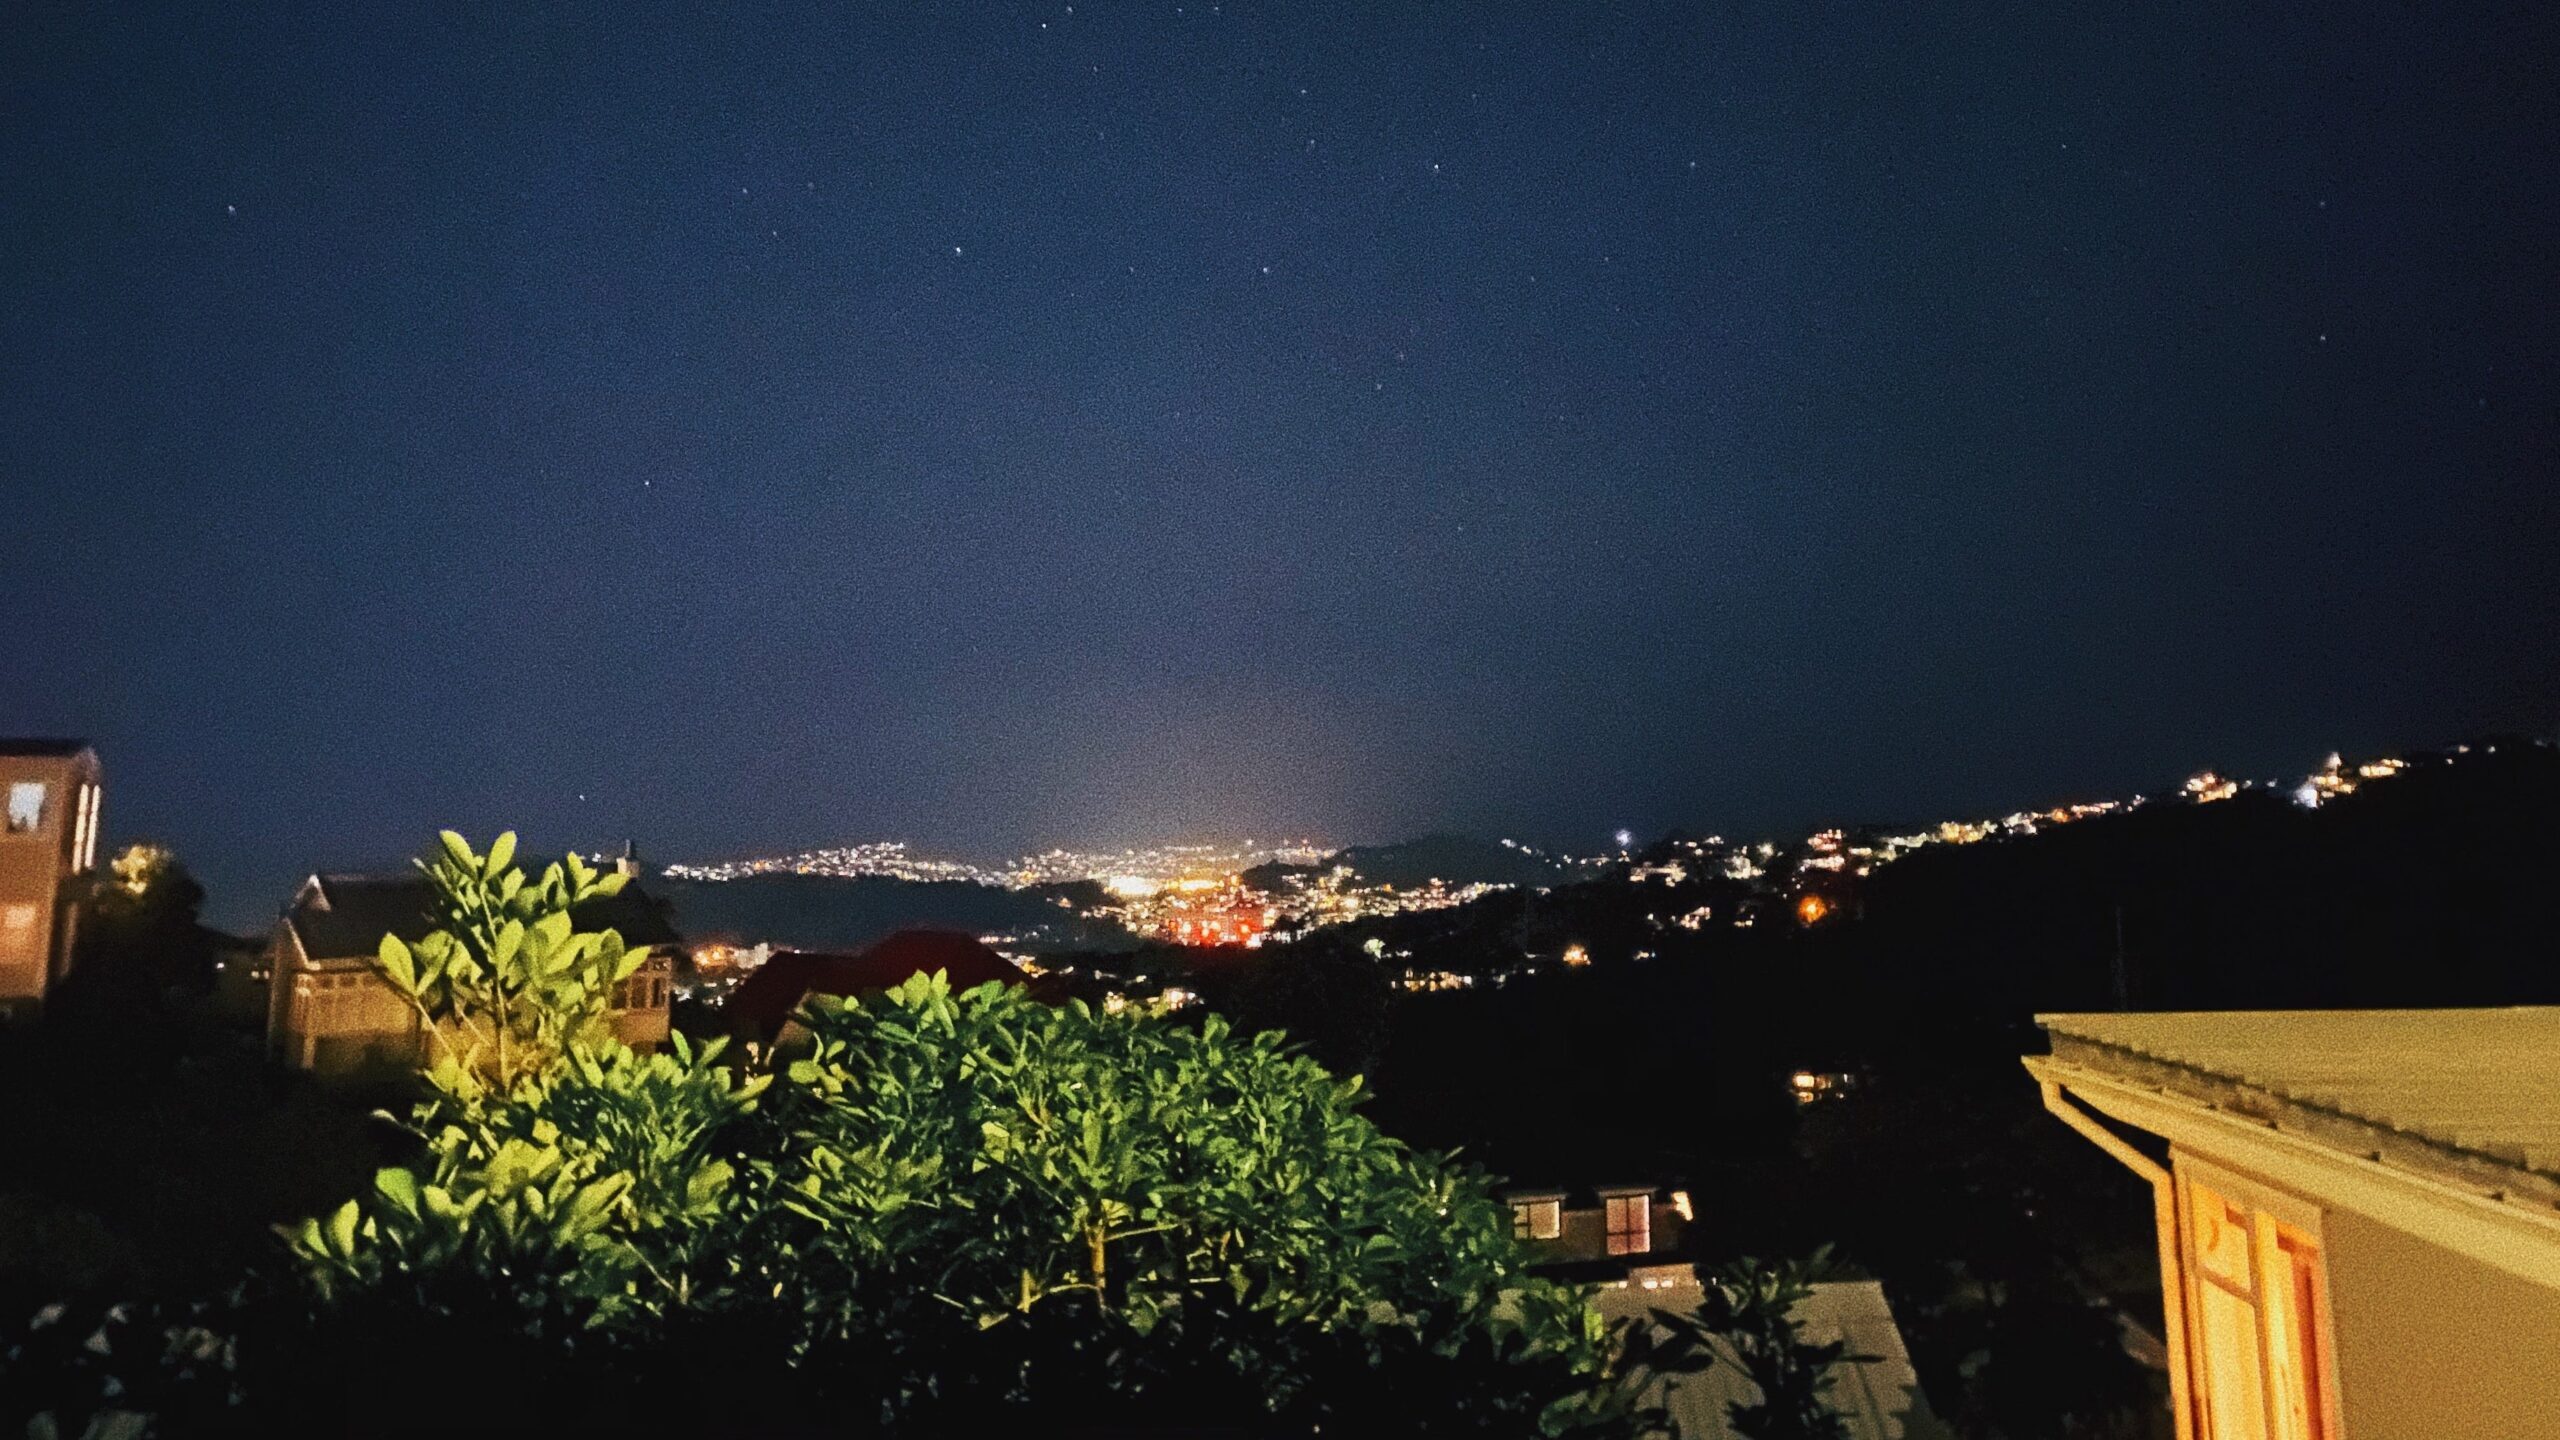 A view of Wellington hills at night with stars in the sky.